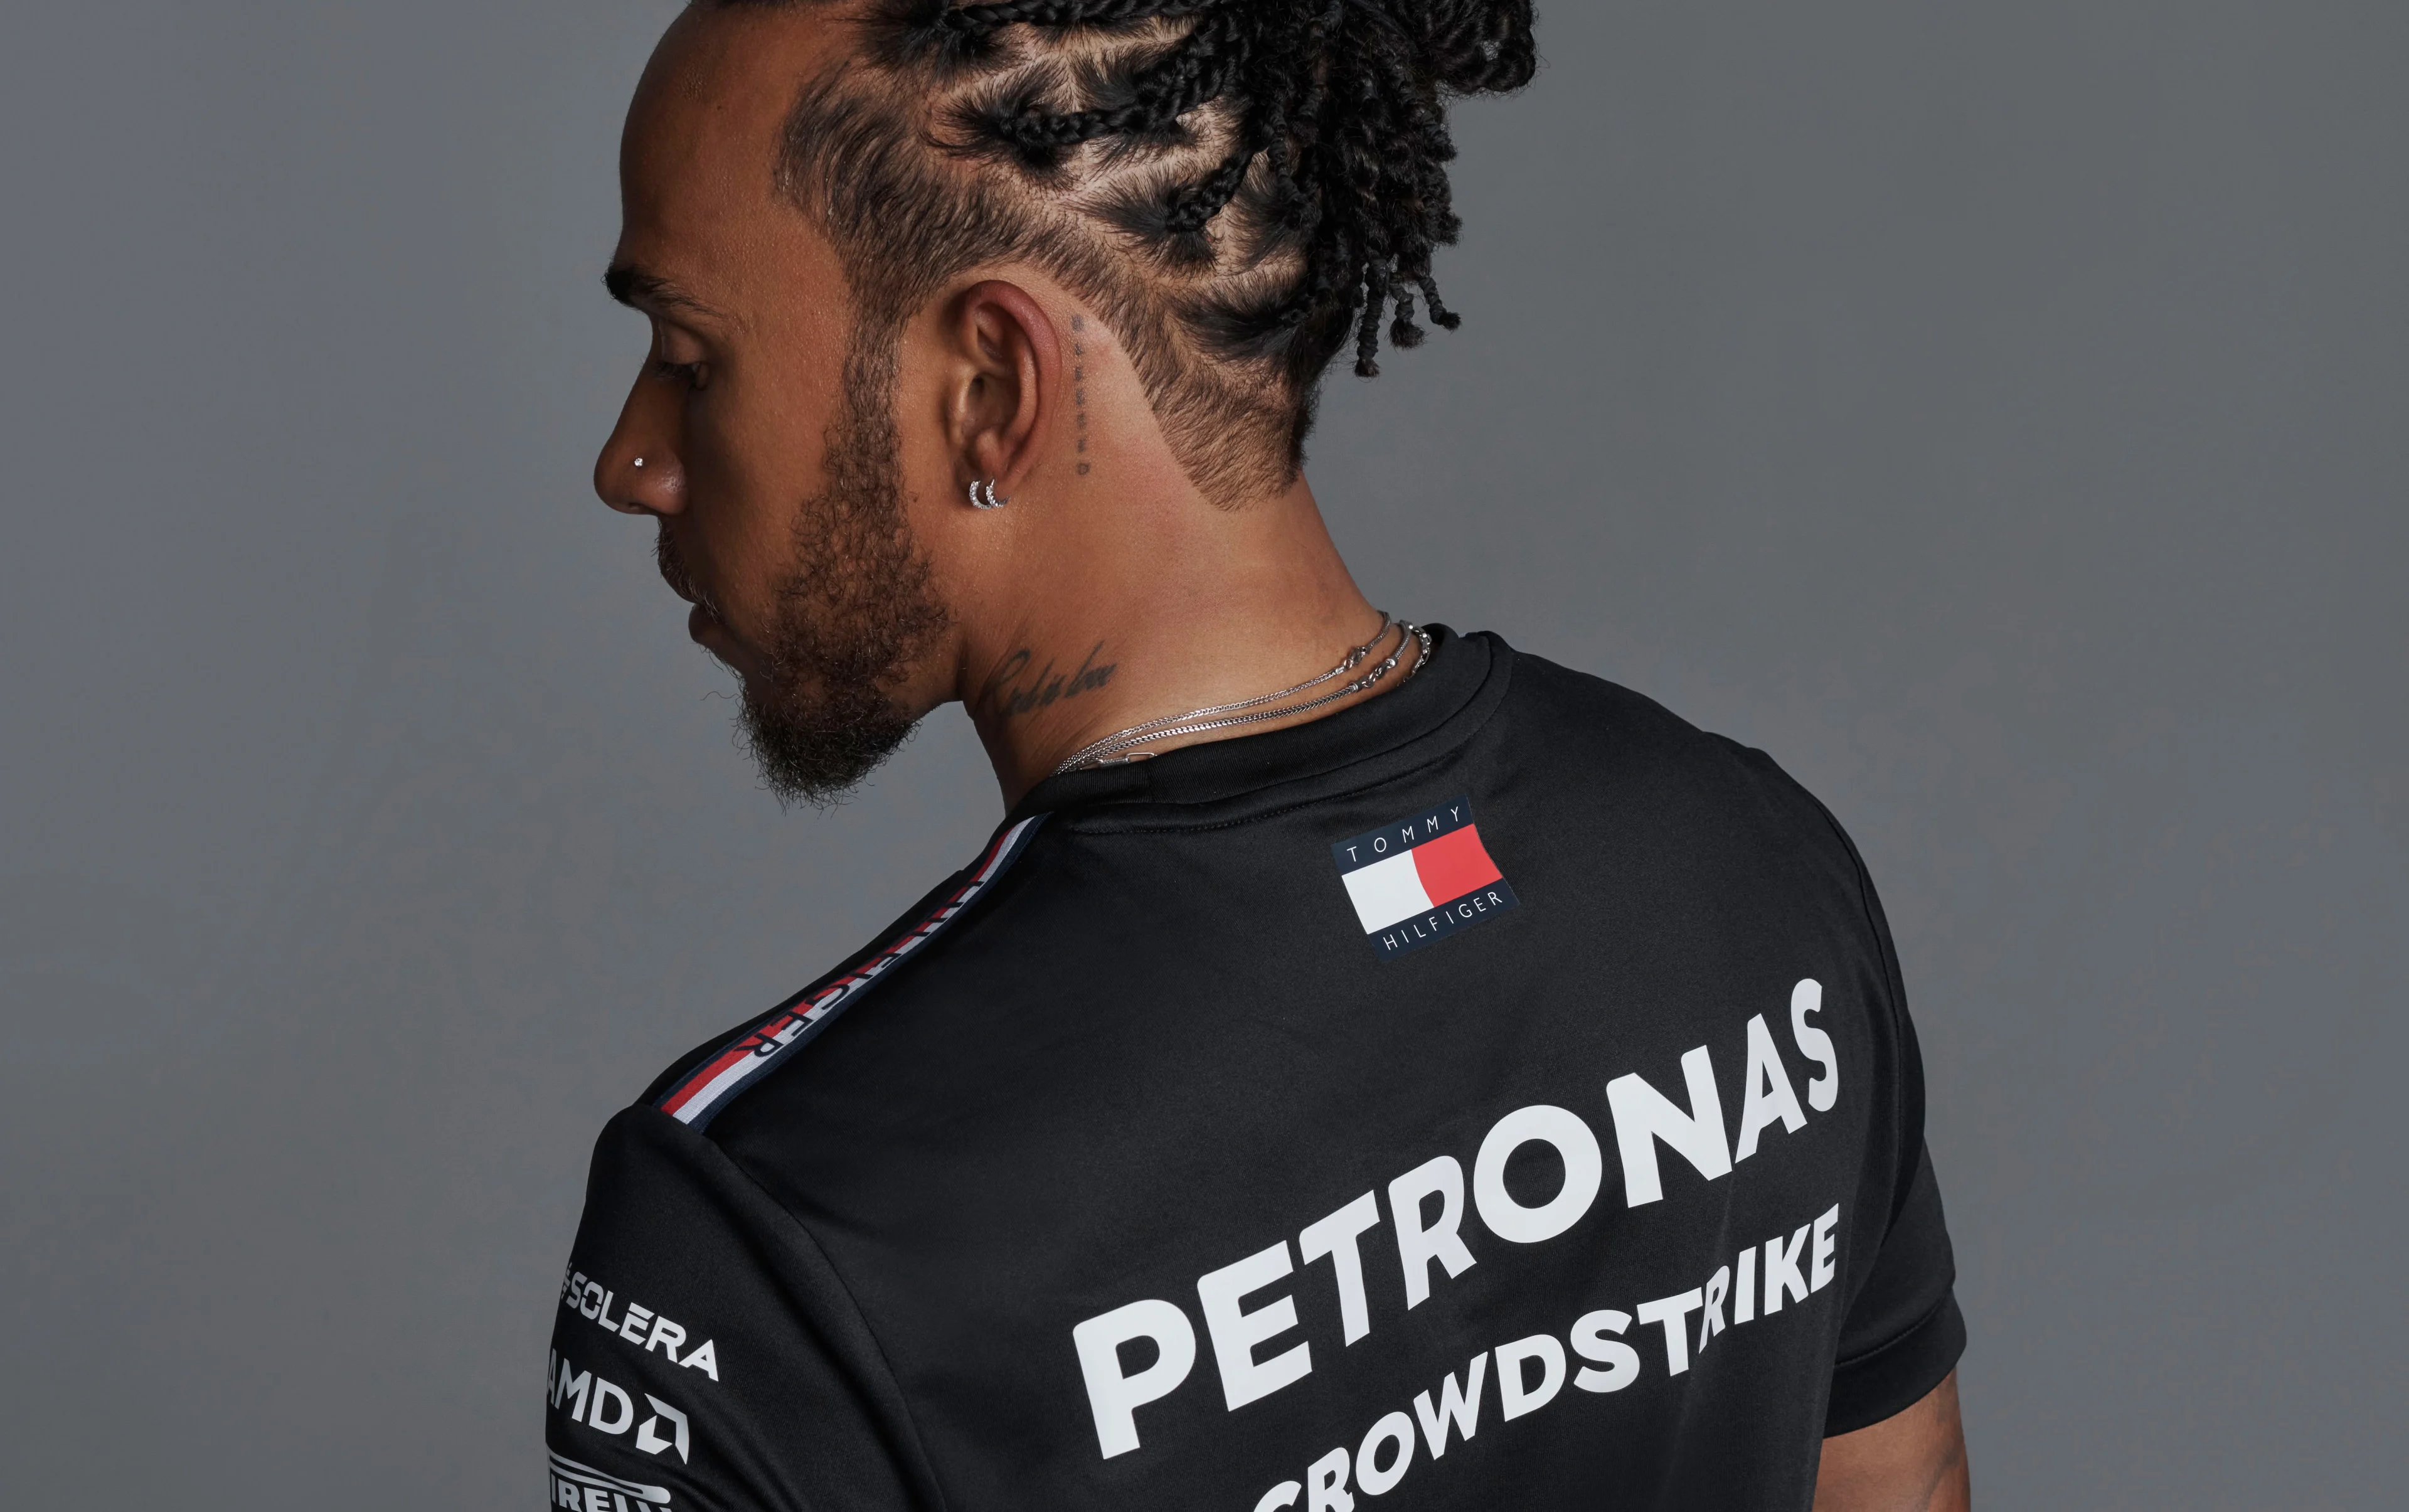 Tommy Hilfiger - Our Partners - Mercedes-AMG PETRONAS F1 Team